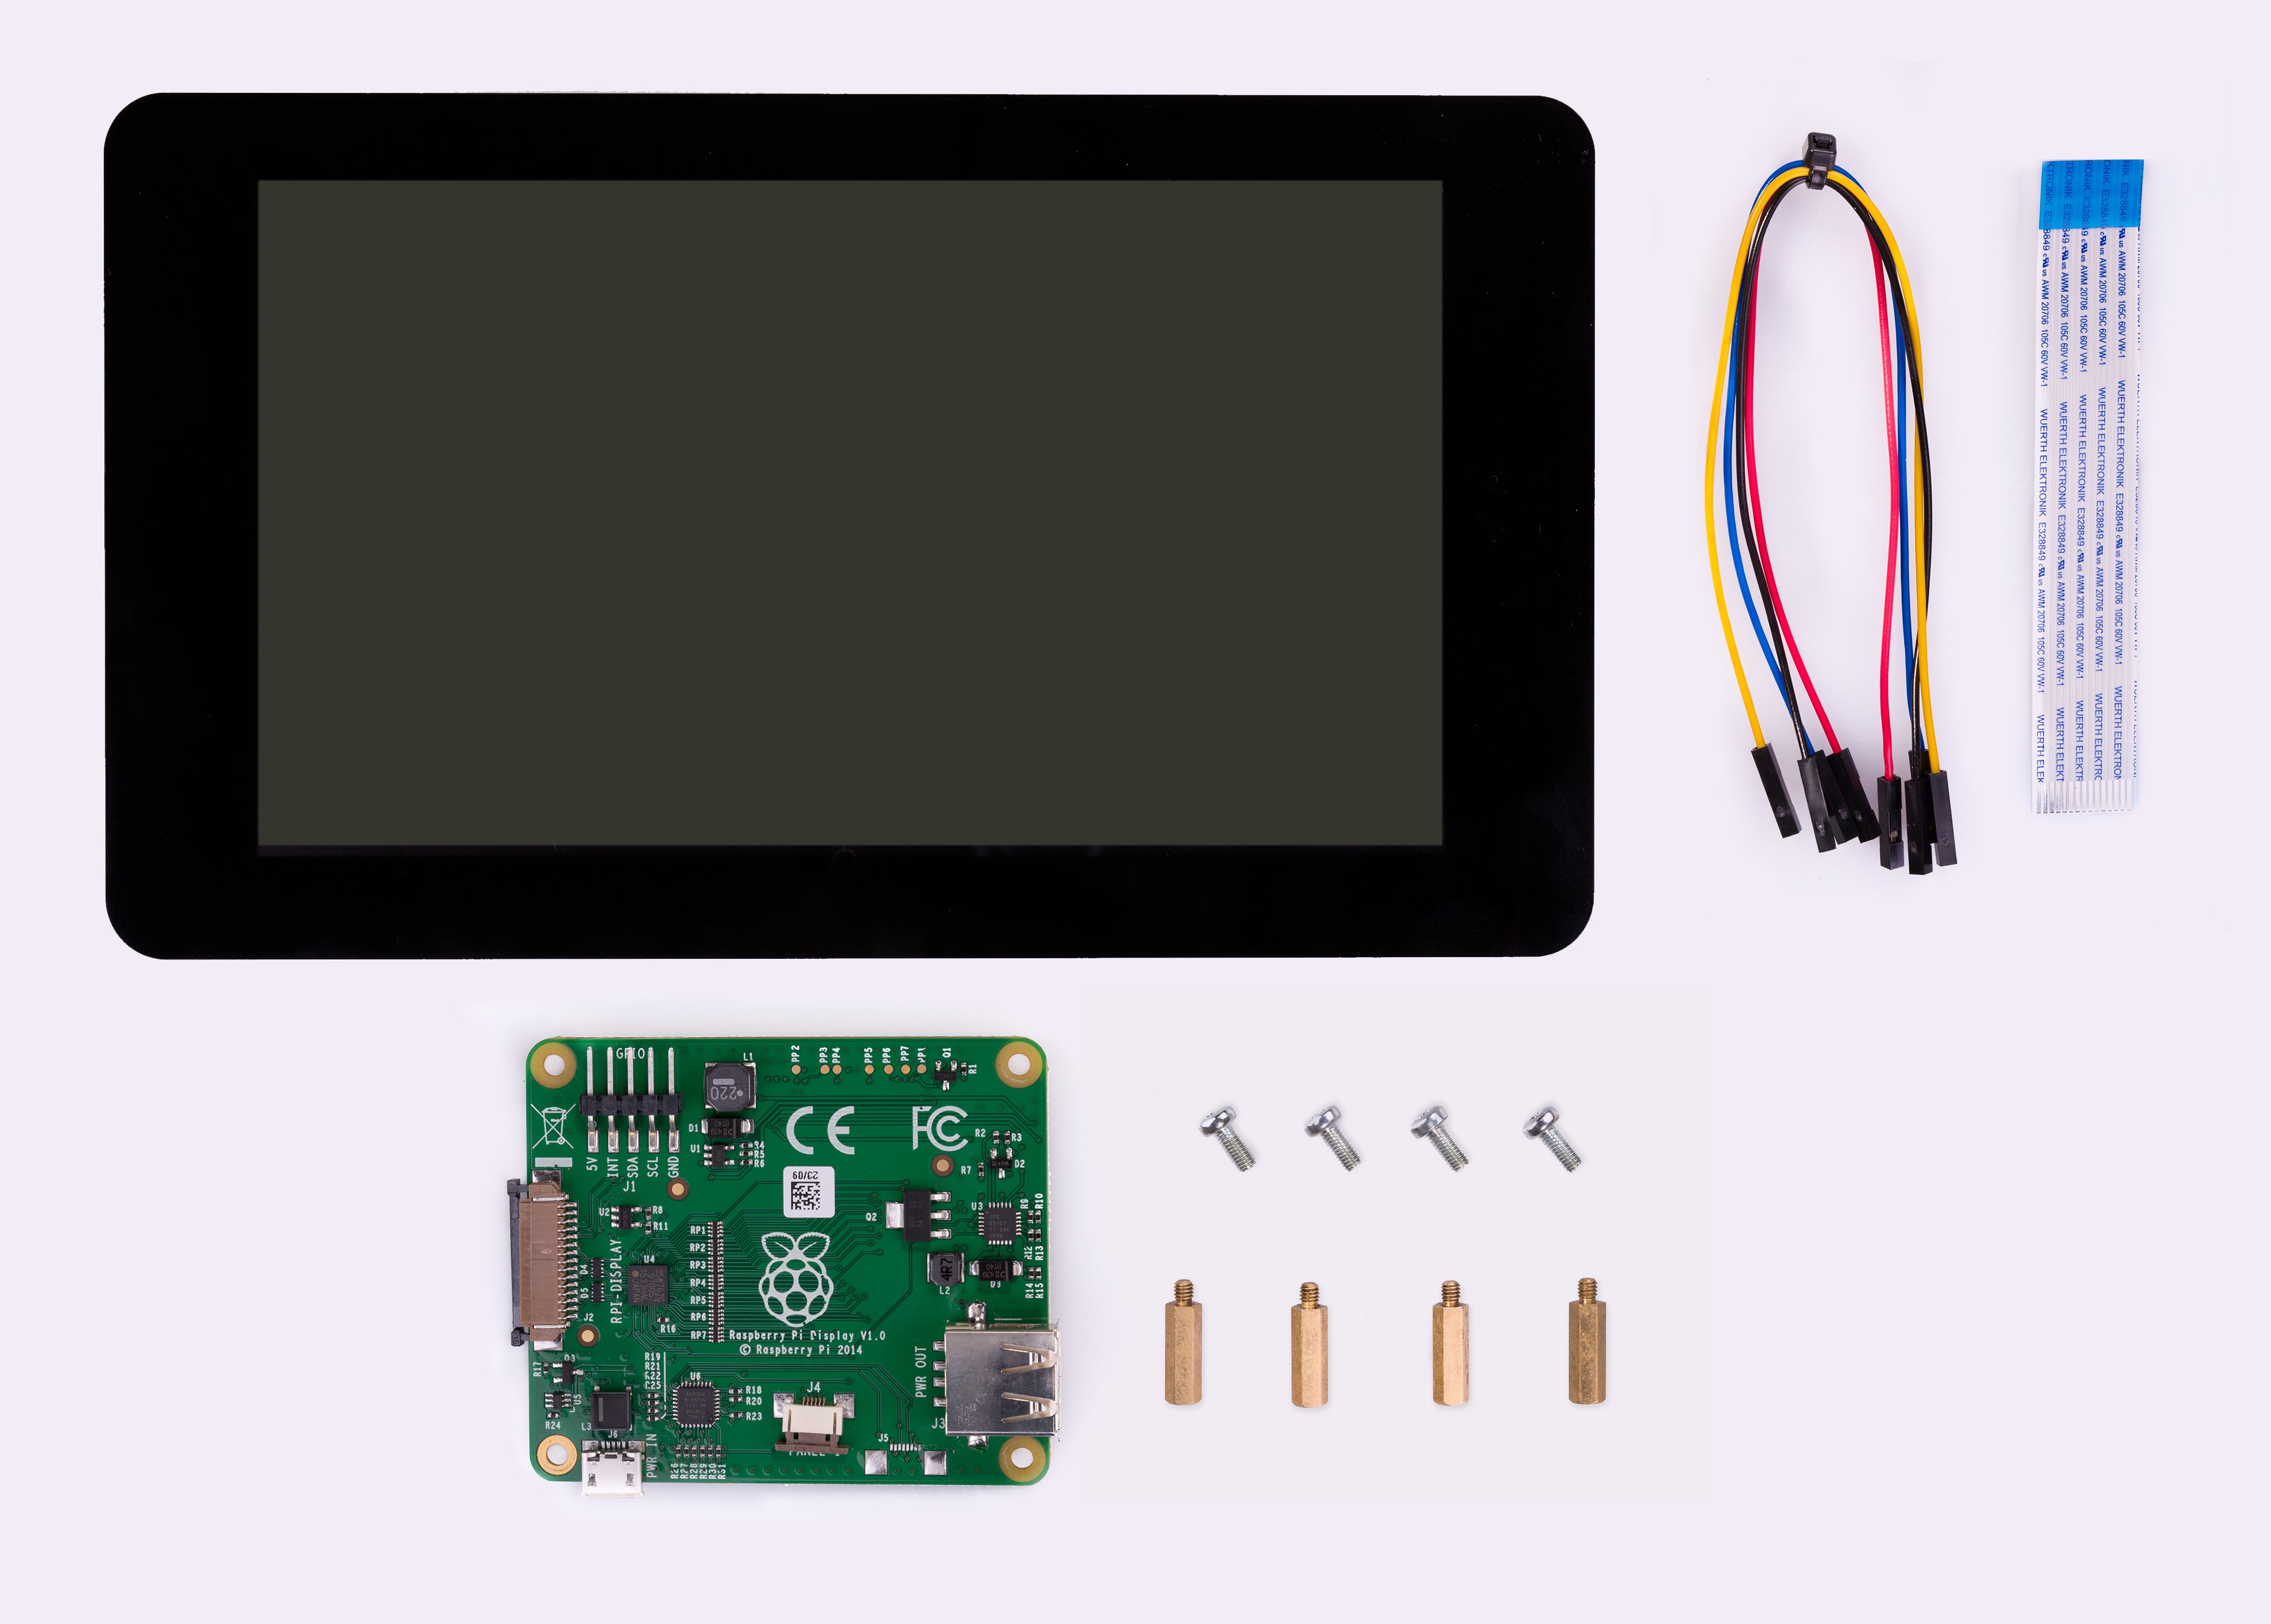 Official Raspberry Pi Displays